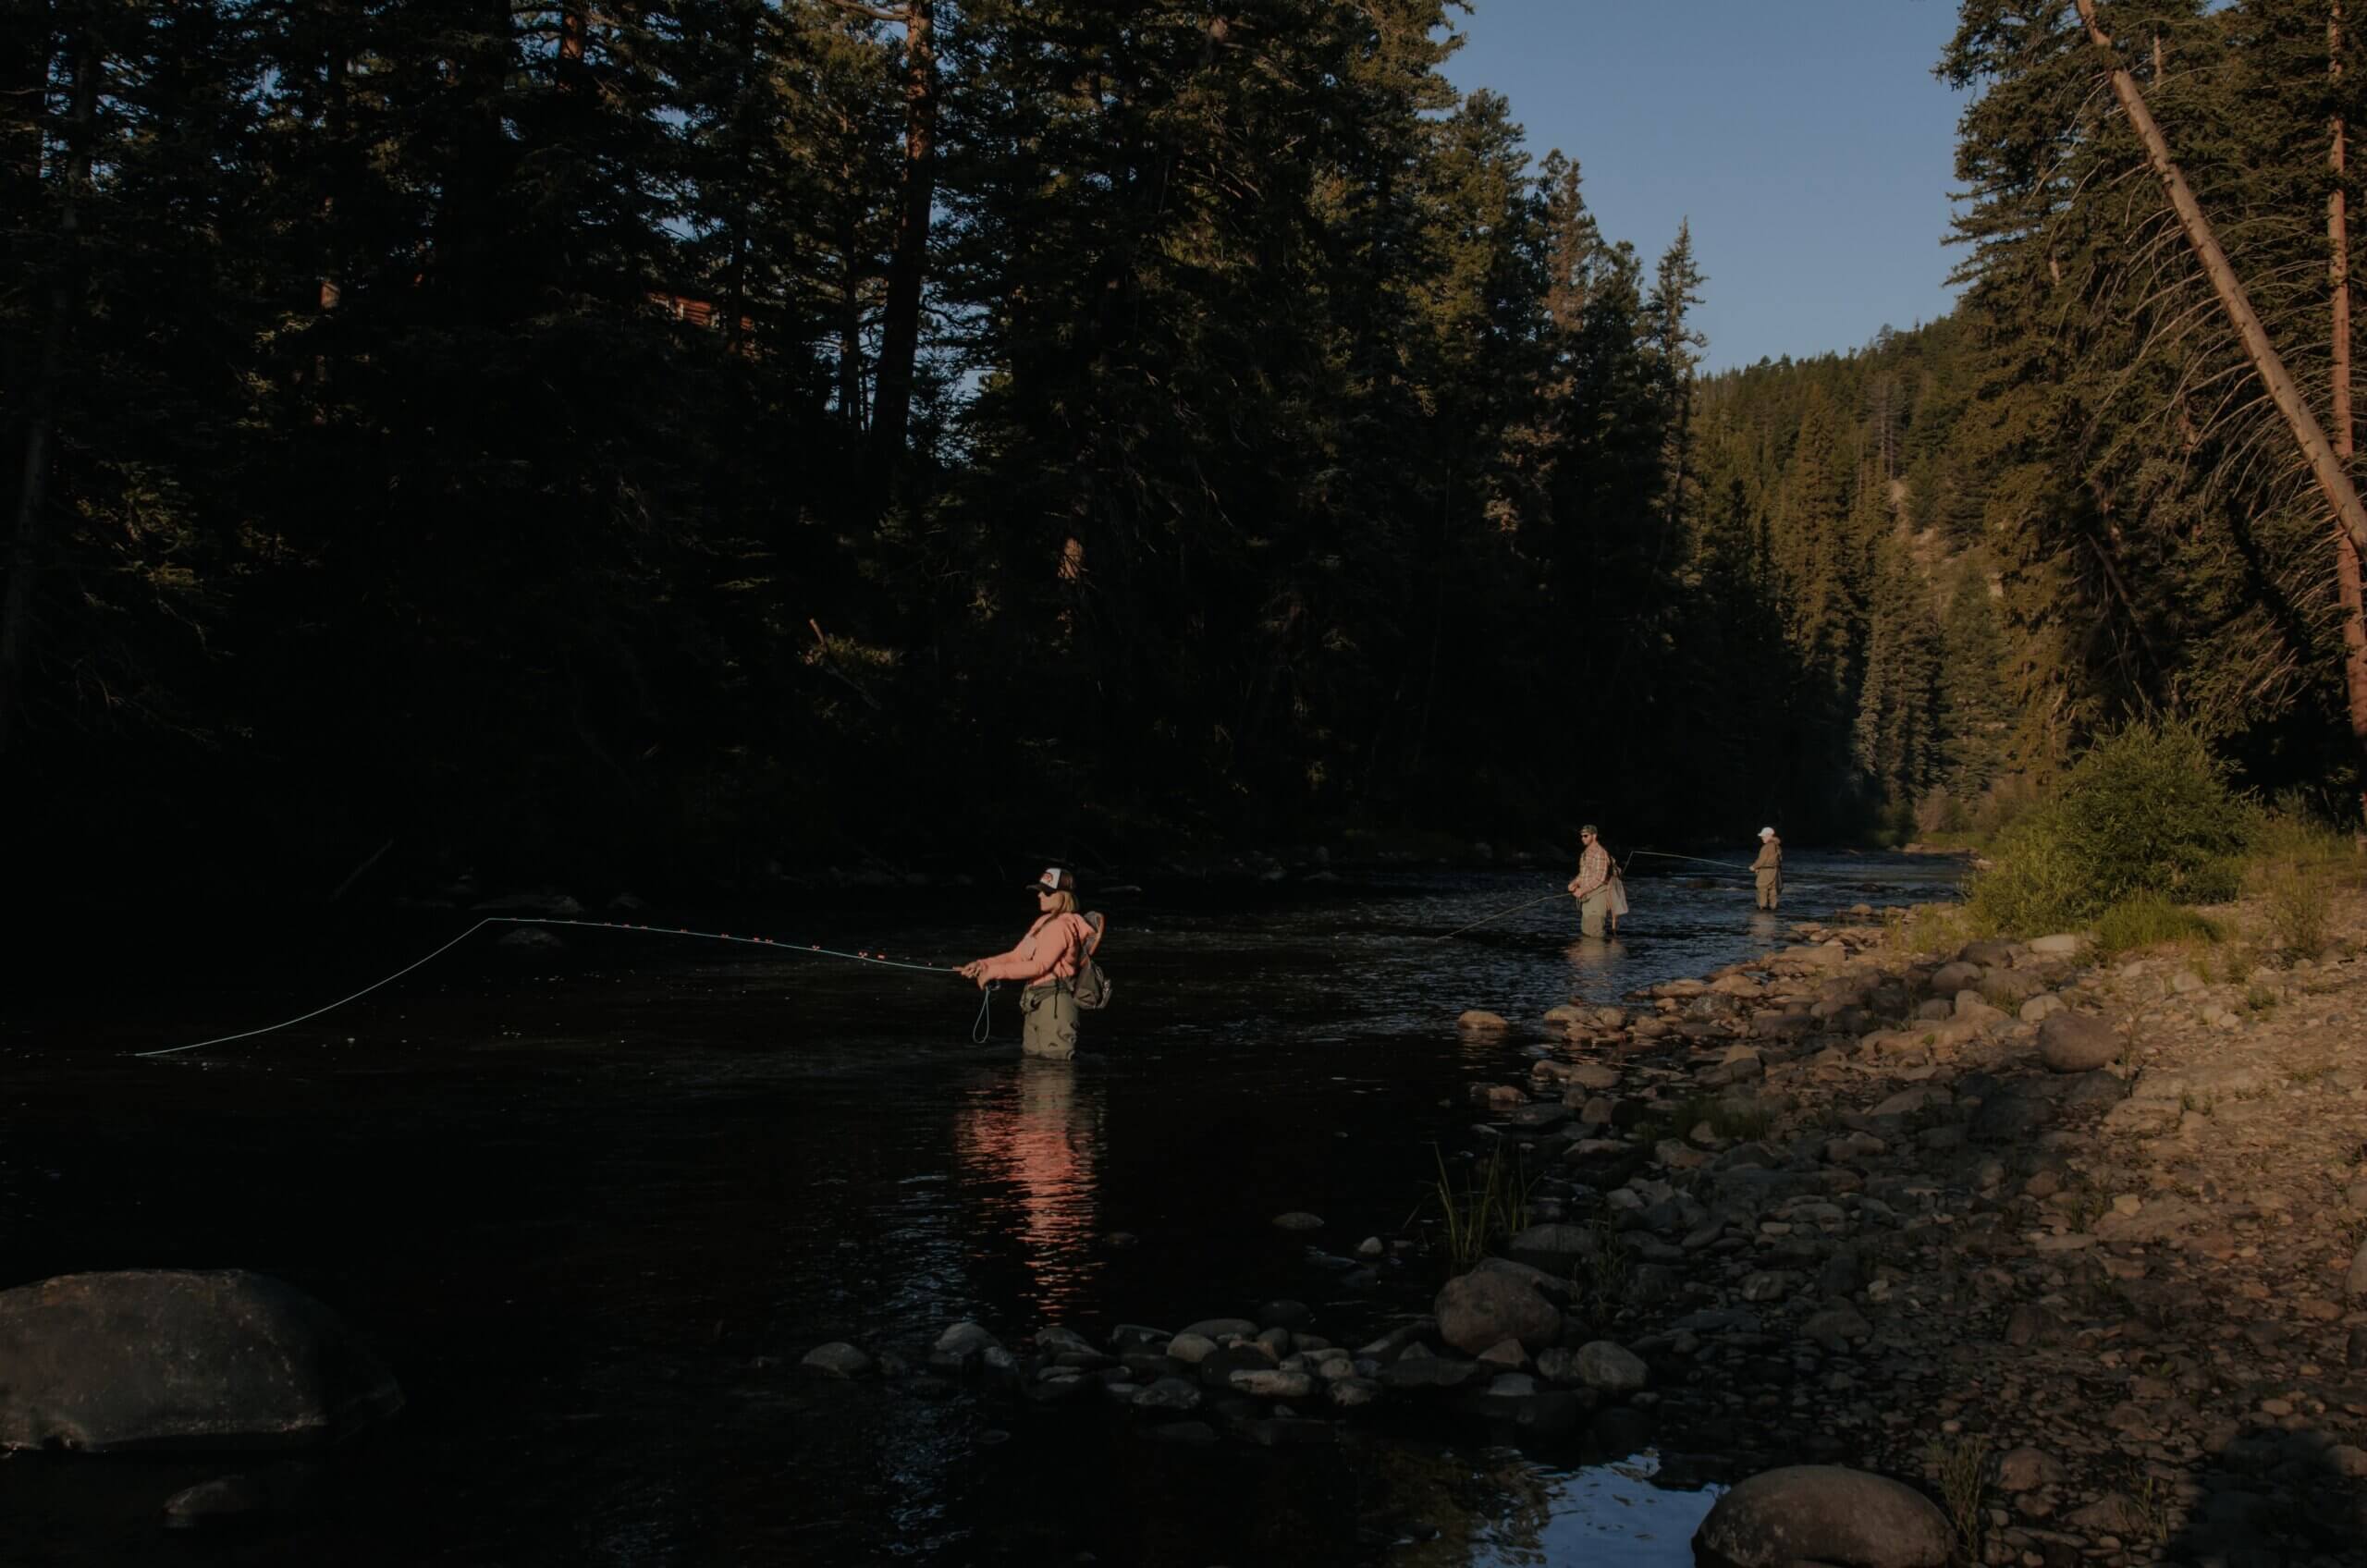 3 people fishing on a river